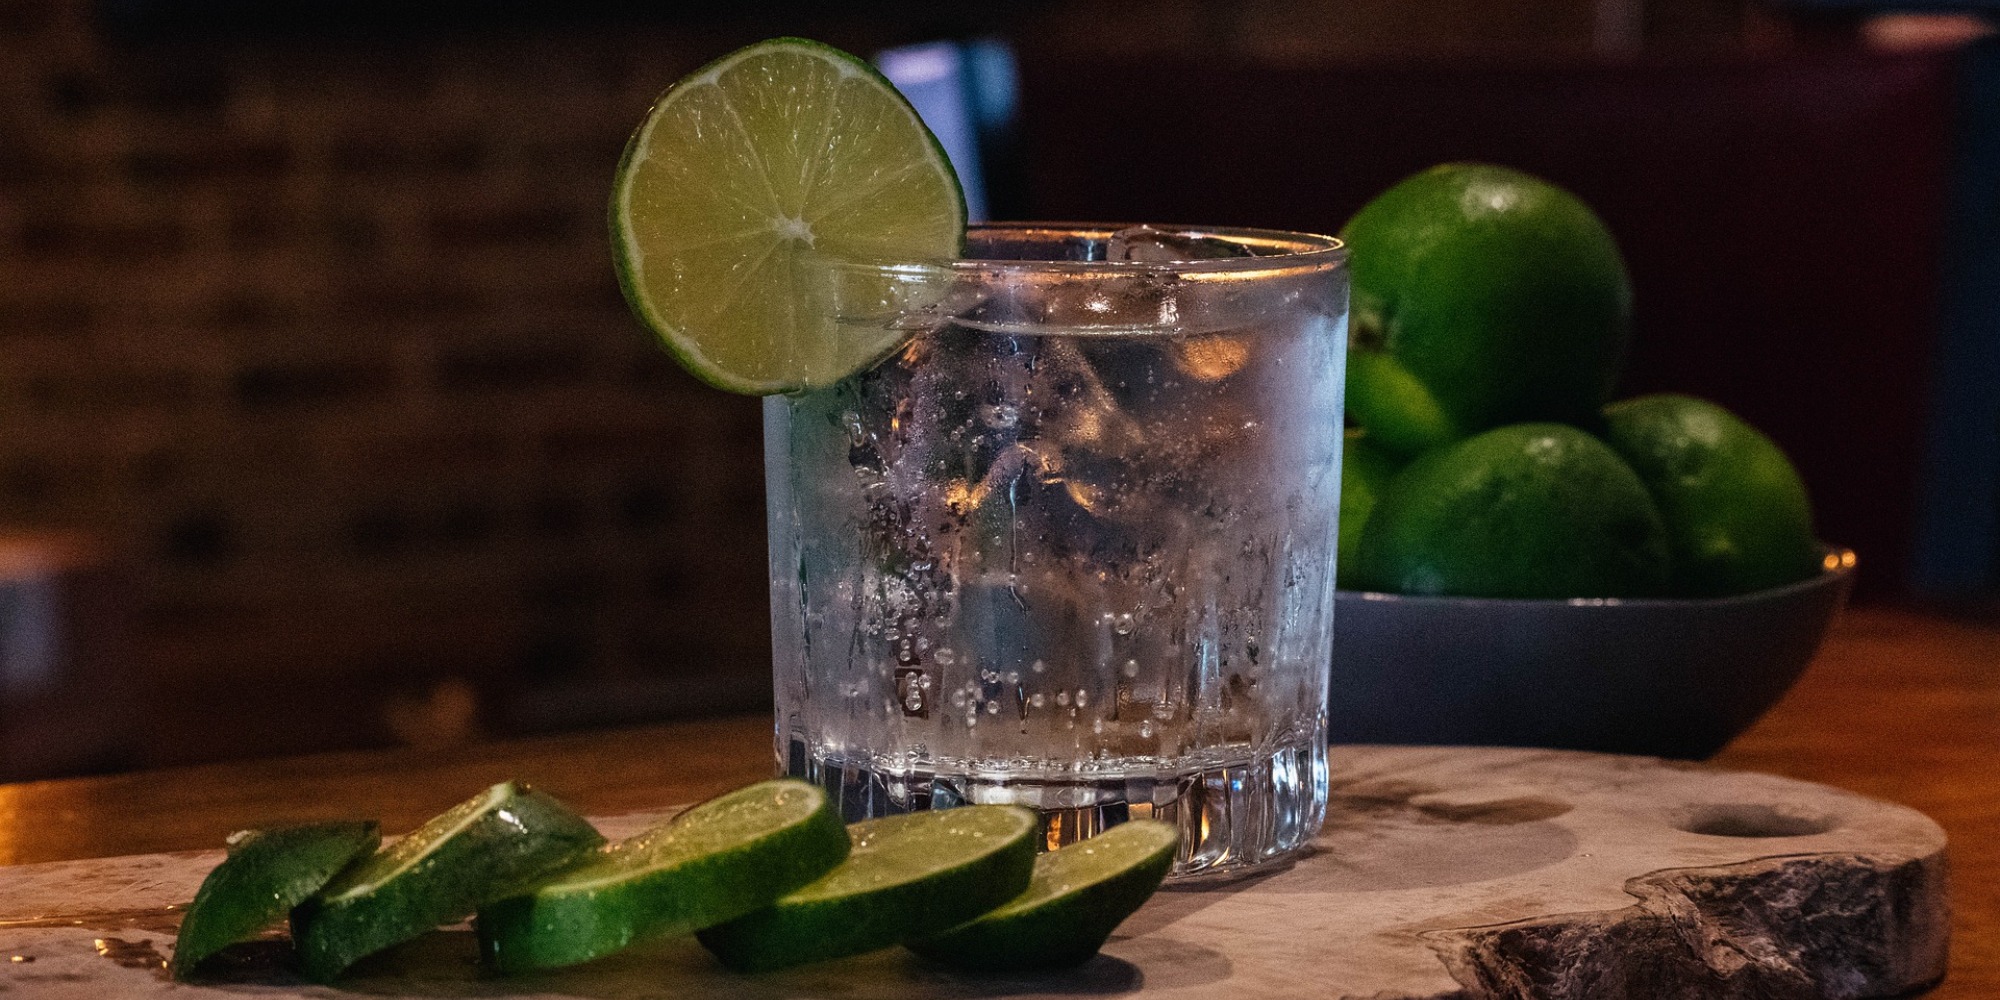 A glass of alcohol with condensation dripping down the outside of the glass with a slice of lime on the rim and ice cubes within. In the foreground is a sliced lime on its side and a bowl of limes behind the glass. The glass is on top of a sliced piece of wood.